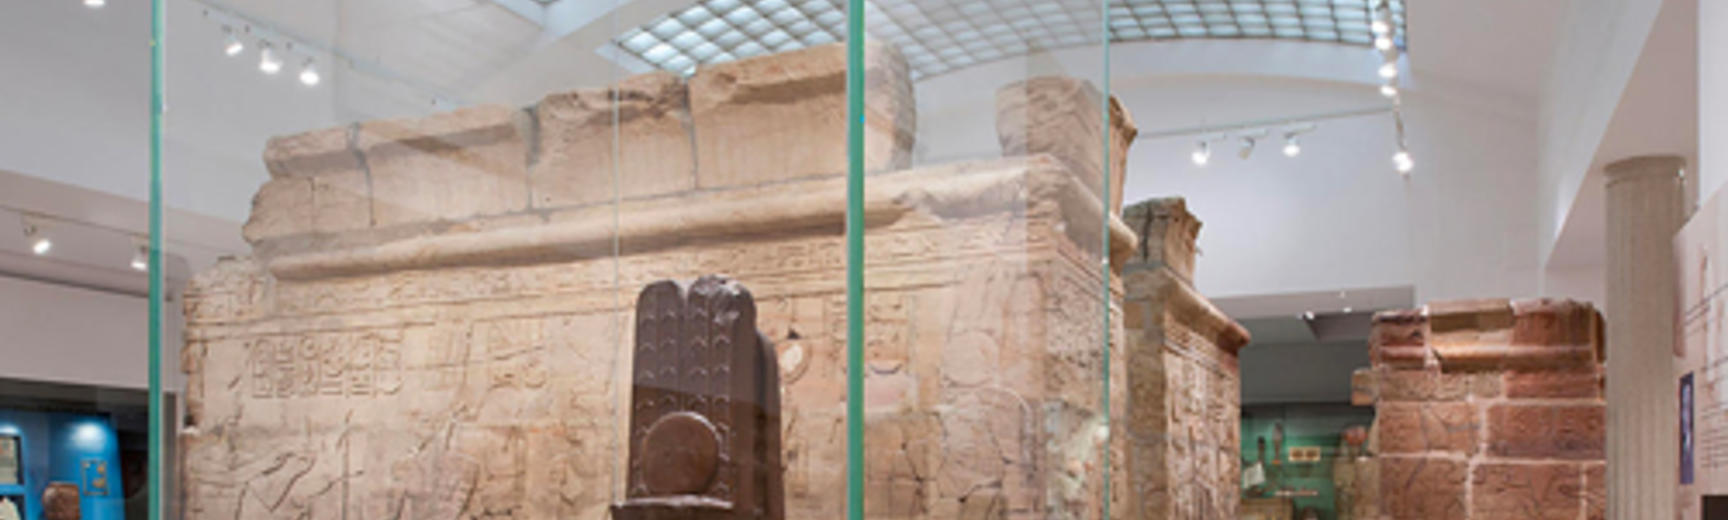 Museum Gallery of Ancient Egypt Objects